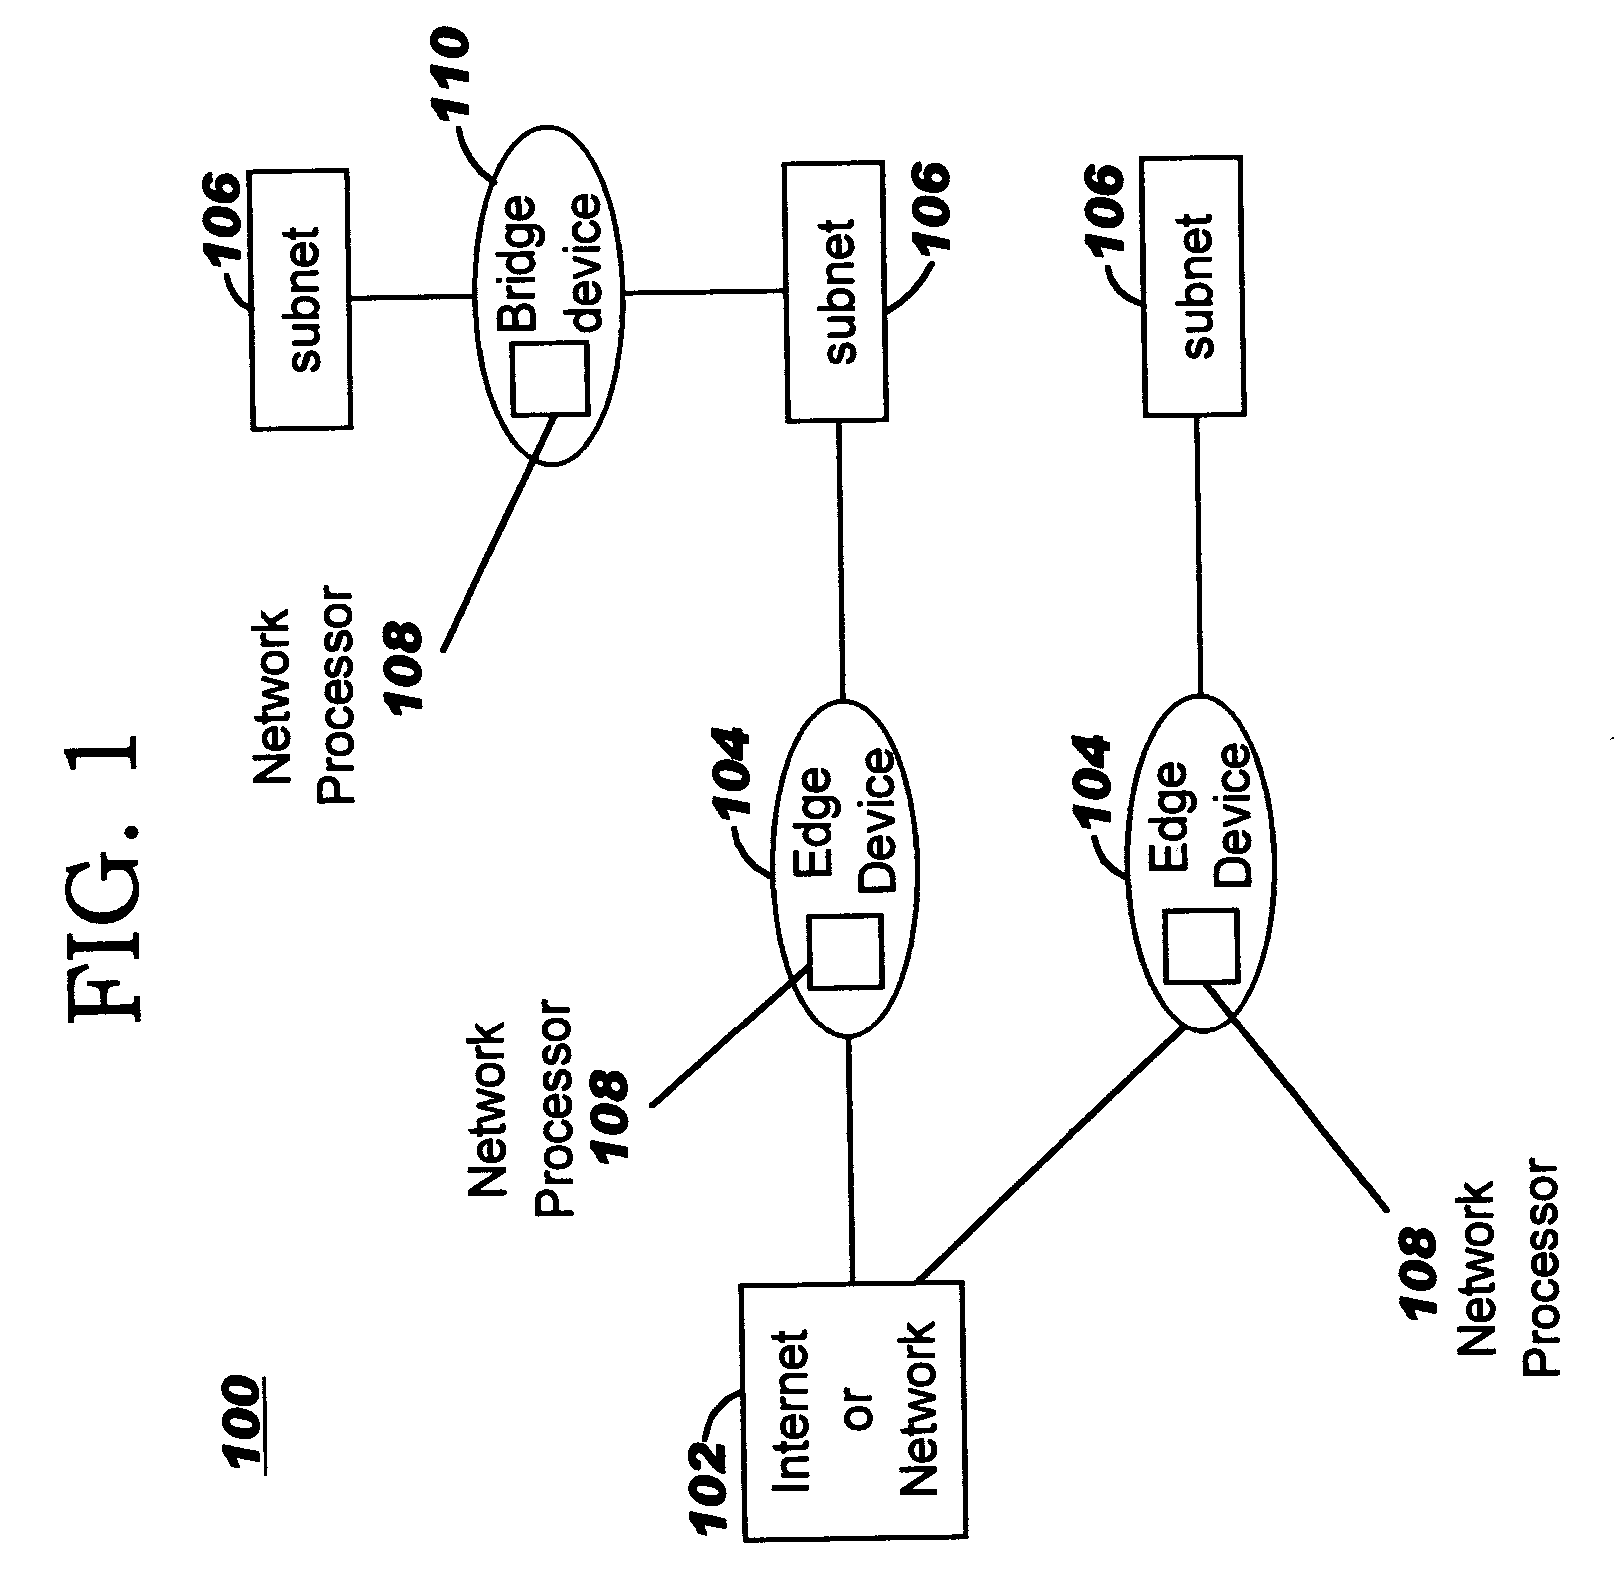 Apparatus and method for caching lookups based upon TCP traffic flow characteristics